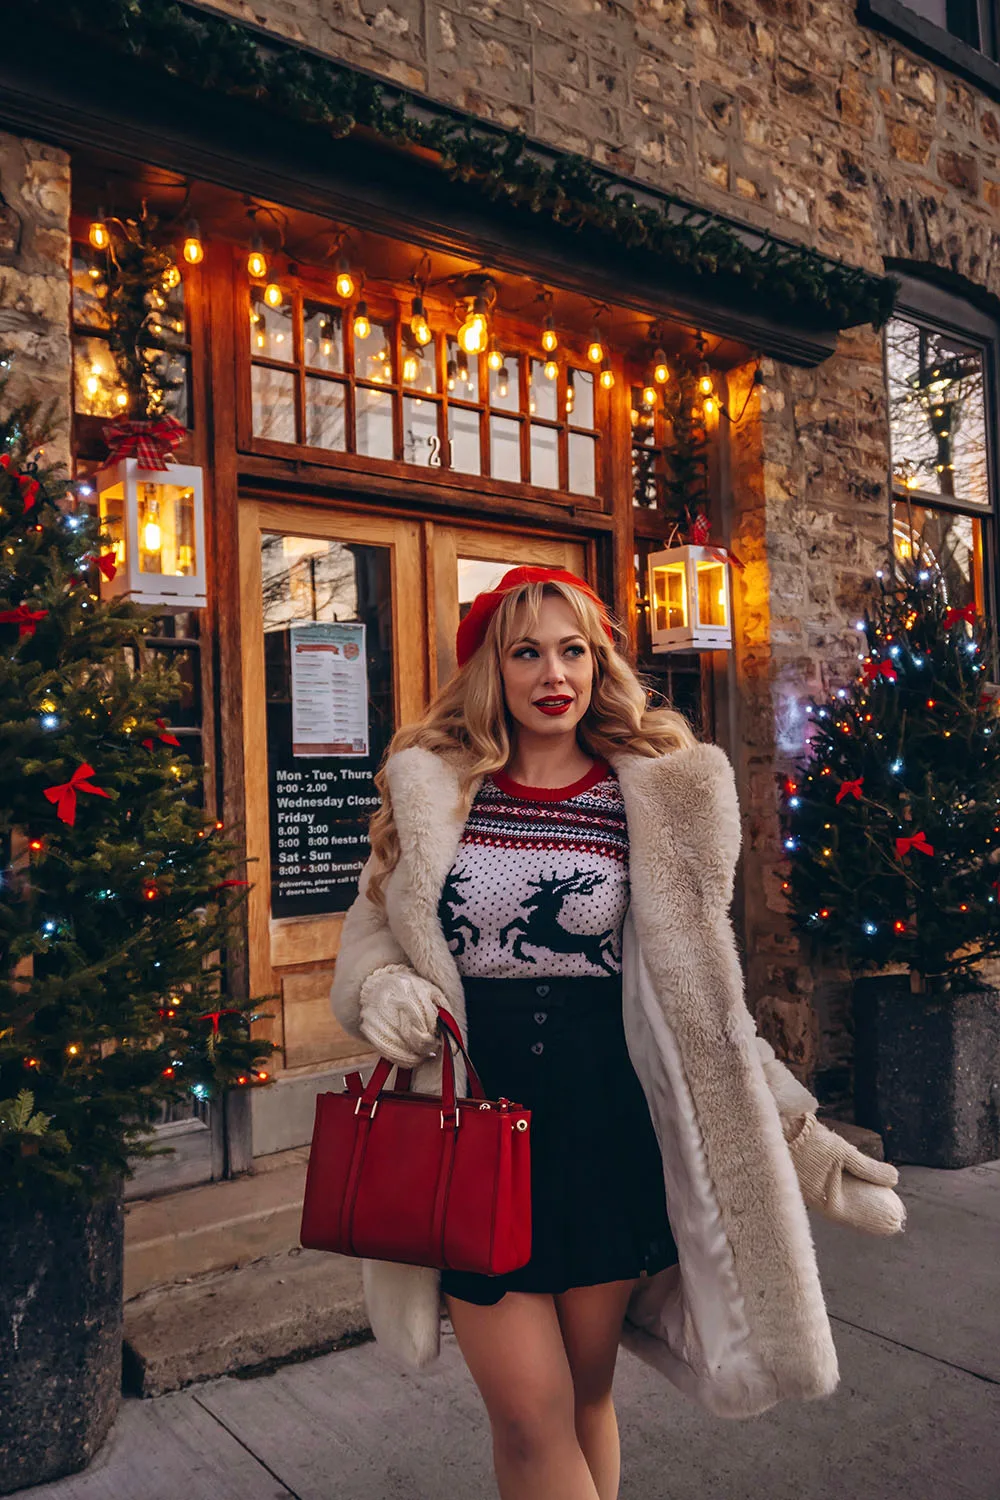 Ever wish you could step into a Hallmark Christmas movie? These 13 magical Christmas towns in Ontario will have you feeling just like you did! Pack your bags, load up the car, and get ready for the ultimate Christmas getaway - a road trip through Ontario's Christmas towns! Pictured here: Gananoque